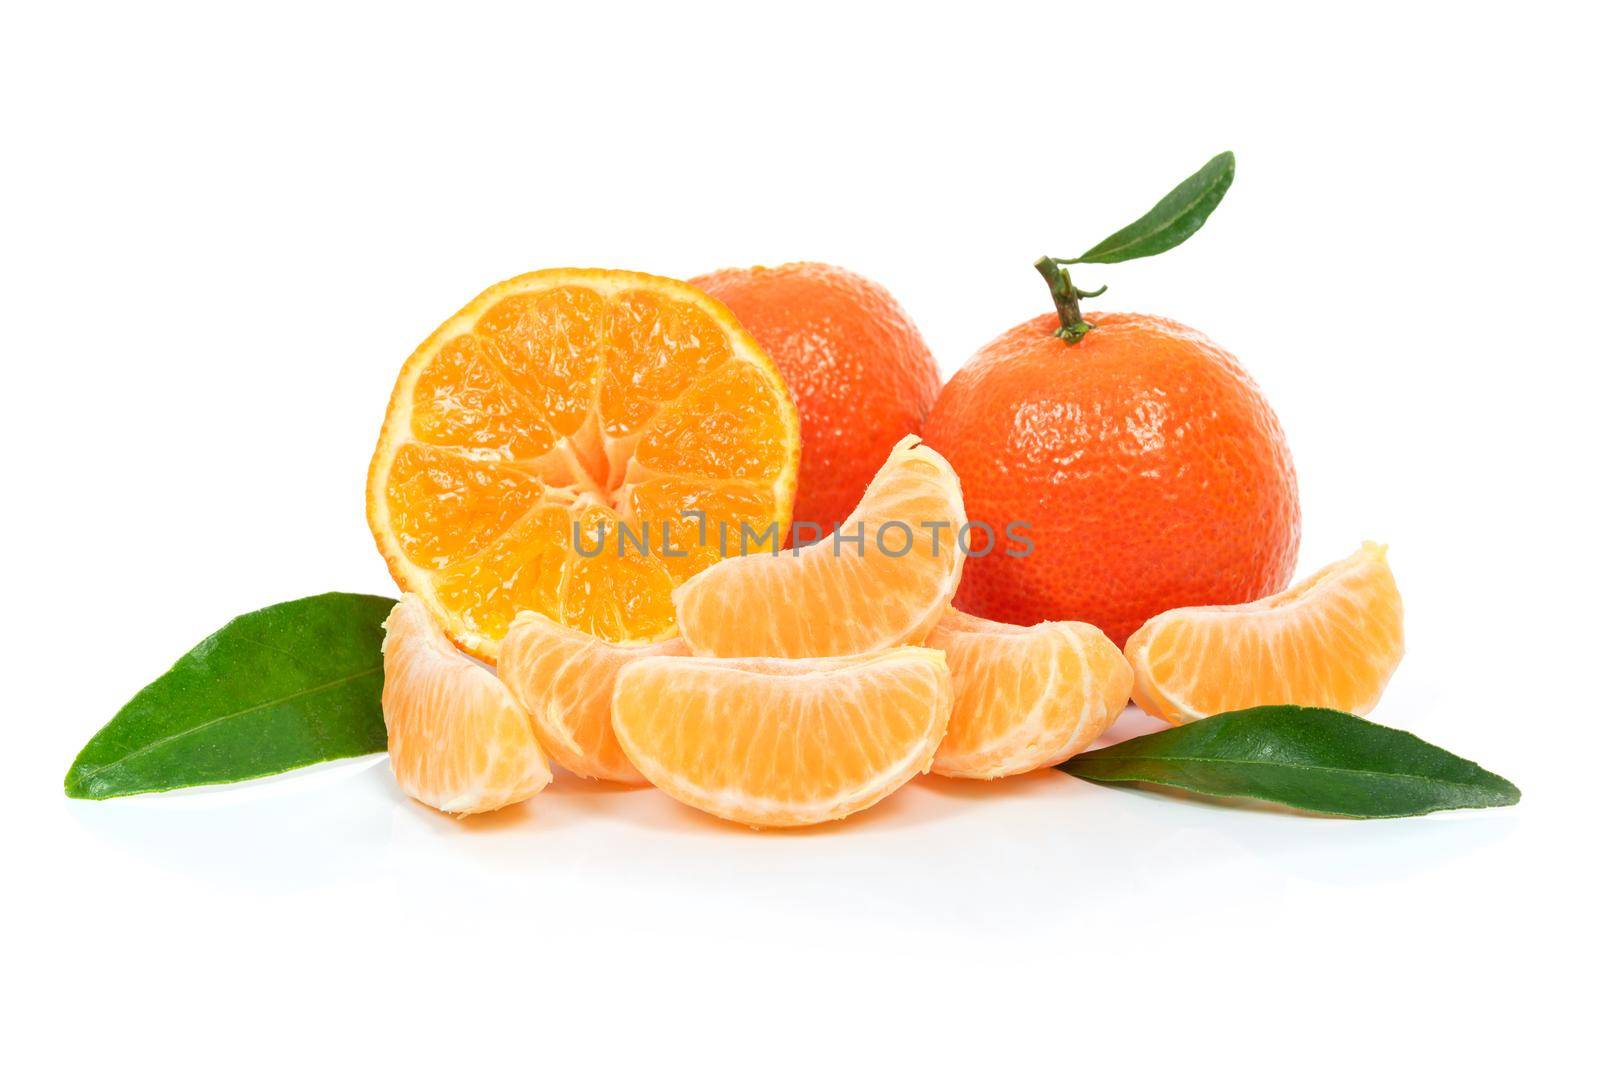 Tropical fruit composition - fresh  fruits and pieces of orange or tangerine with leaves isolated on a white background